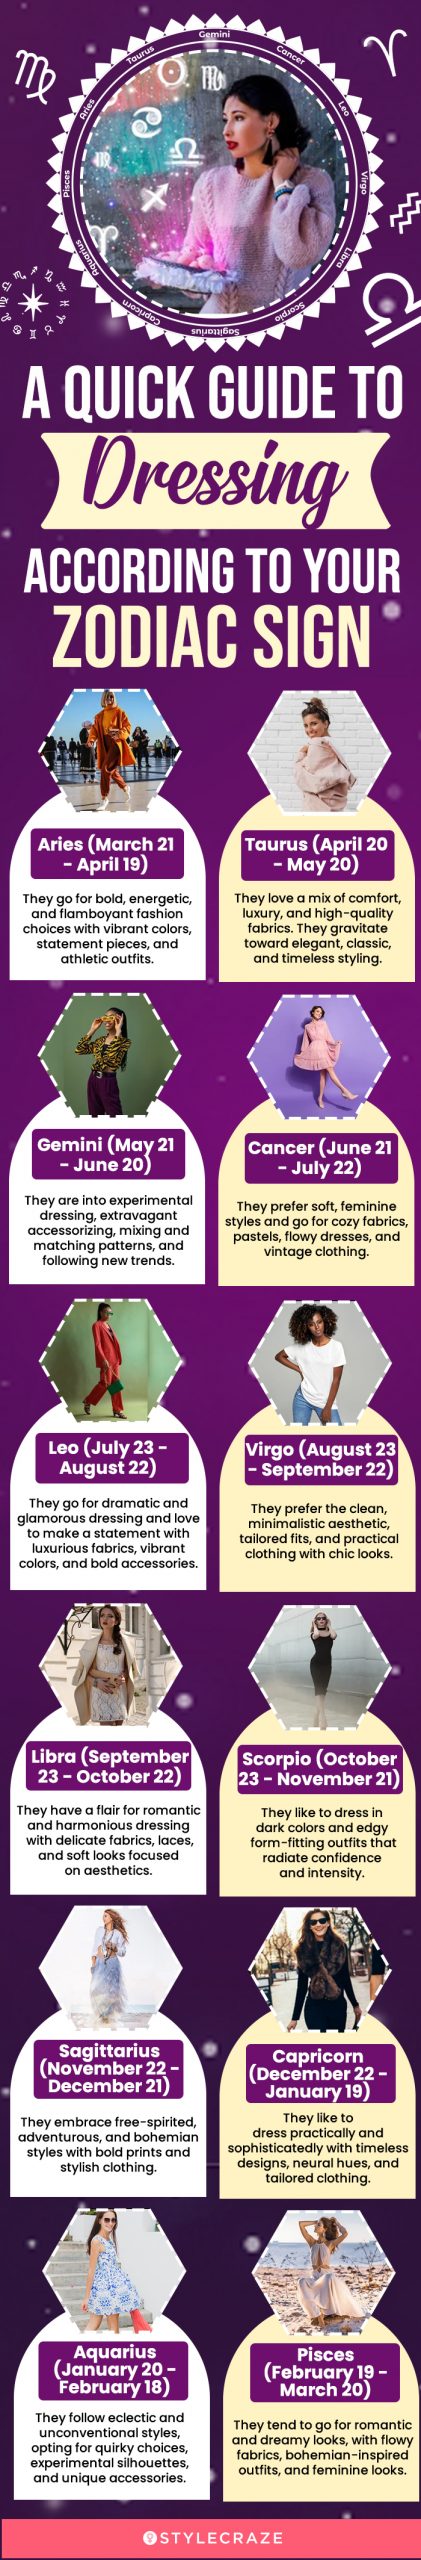 a quick guide to dressing according to your zodiac sign (infographic)